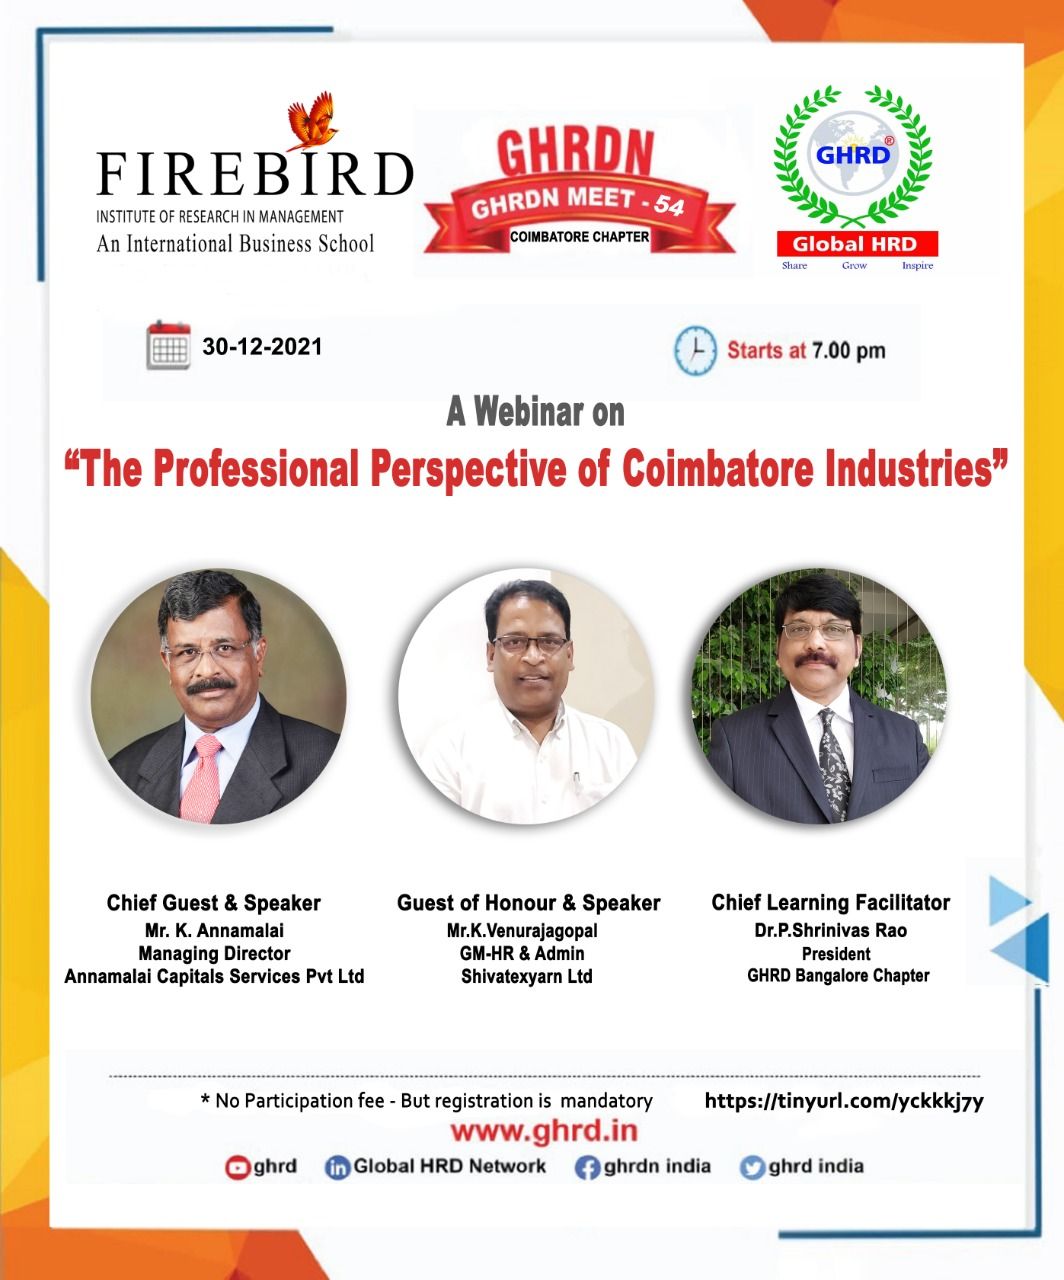 Firebird Institute the Professional Perspective of Coimbatore Industries